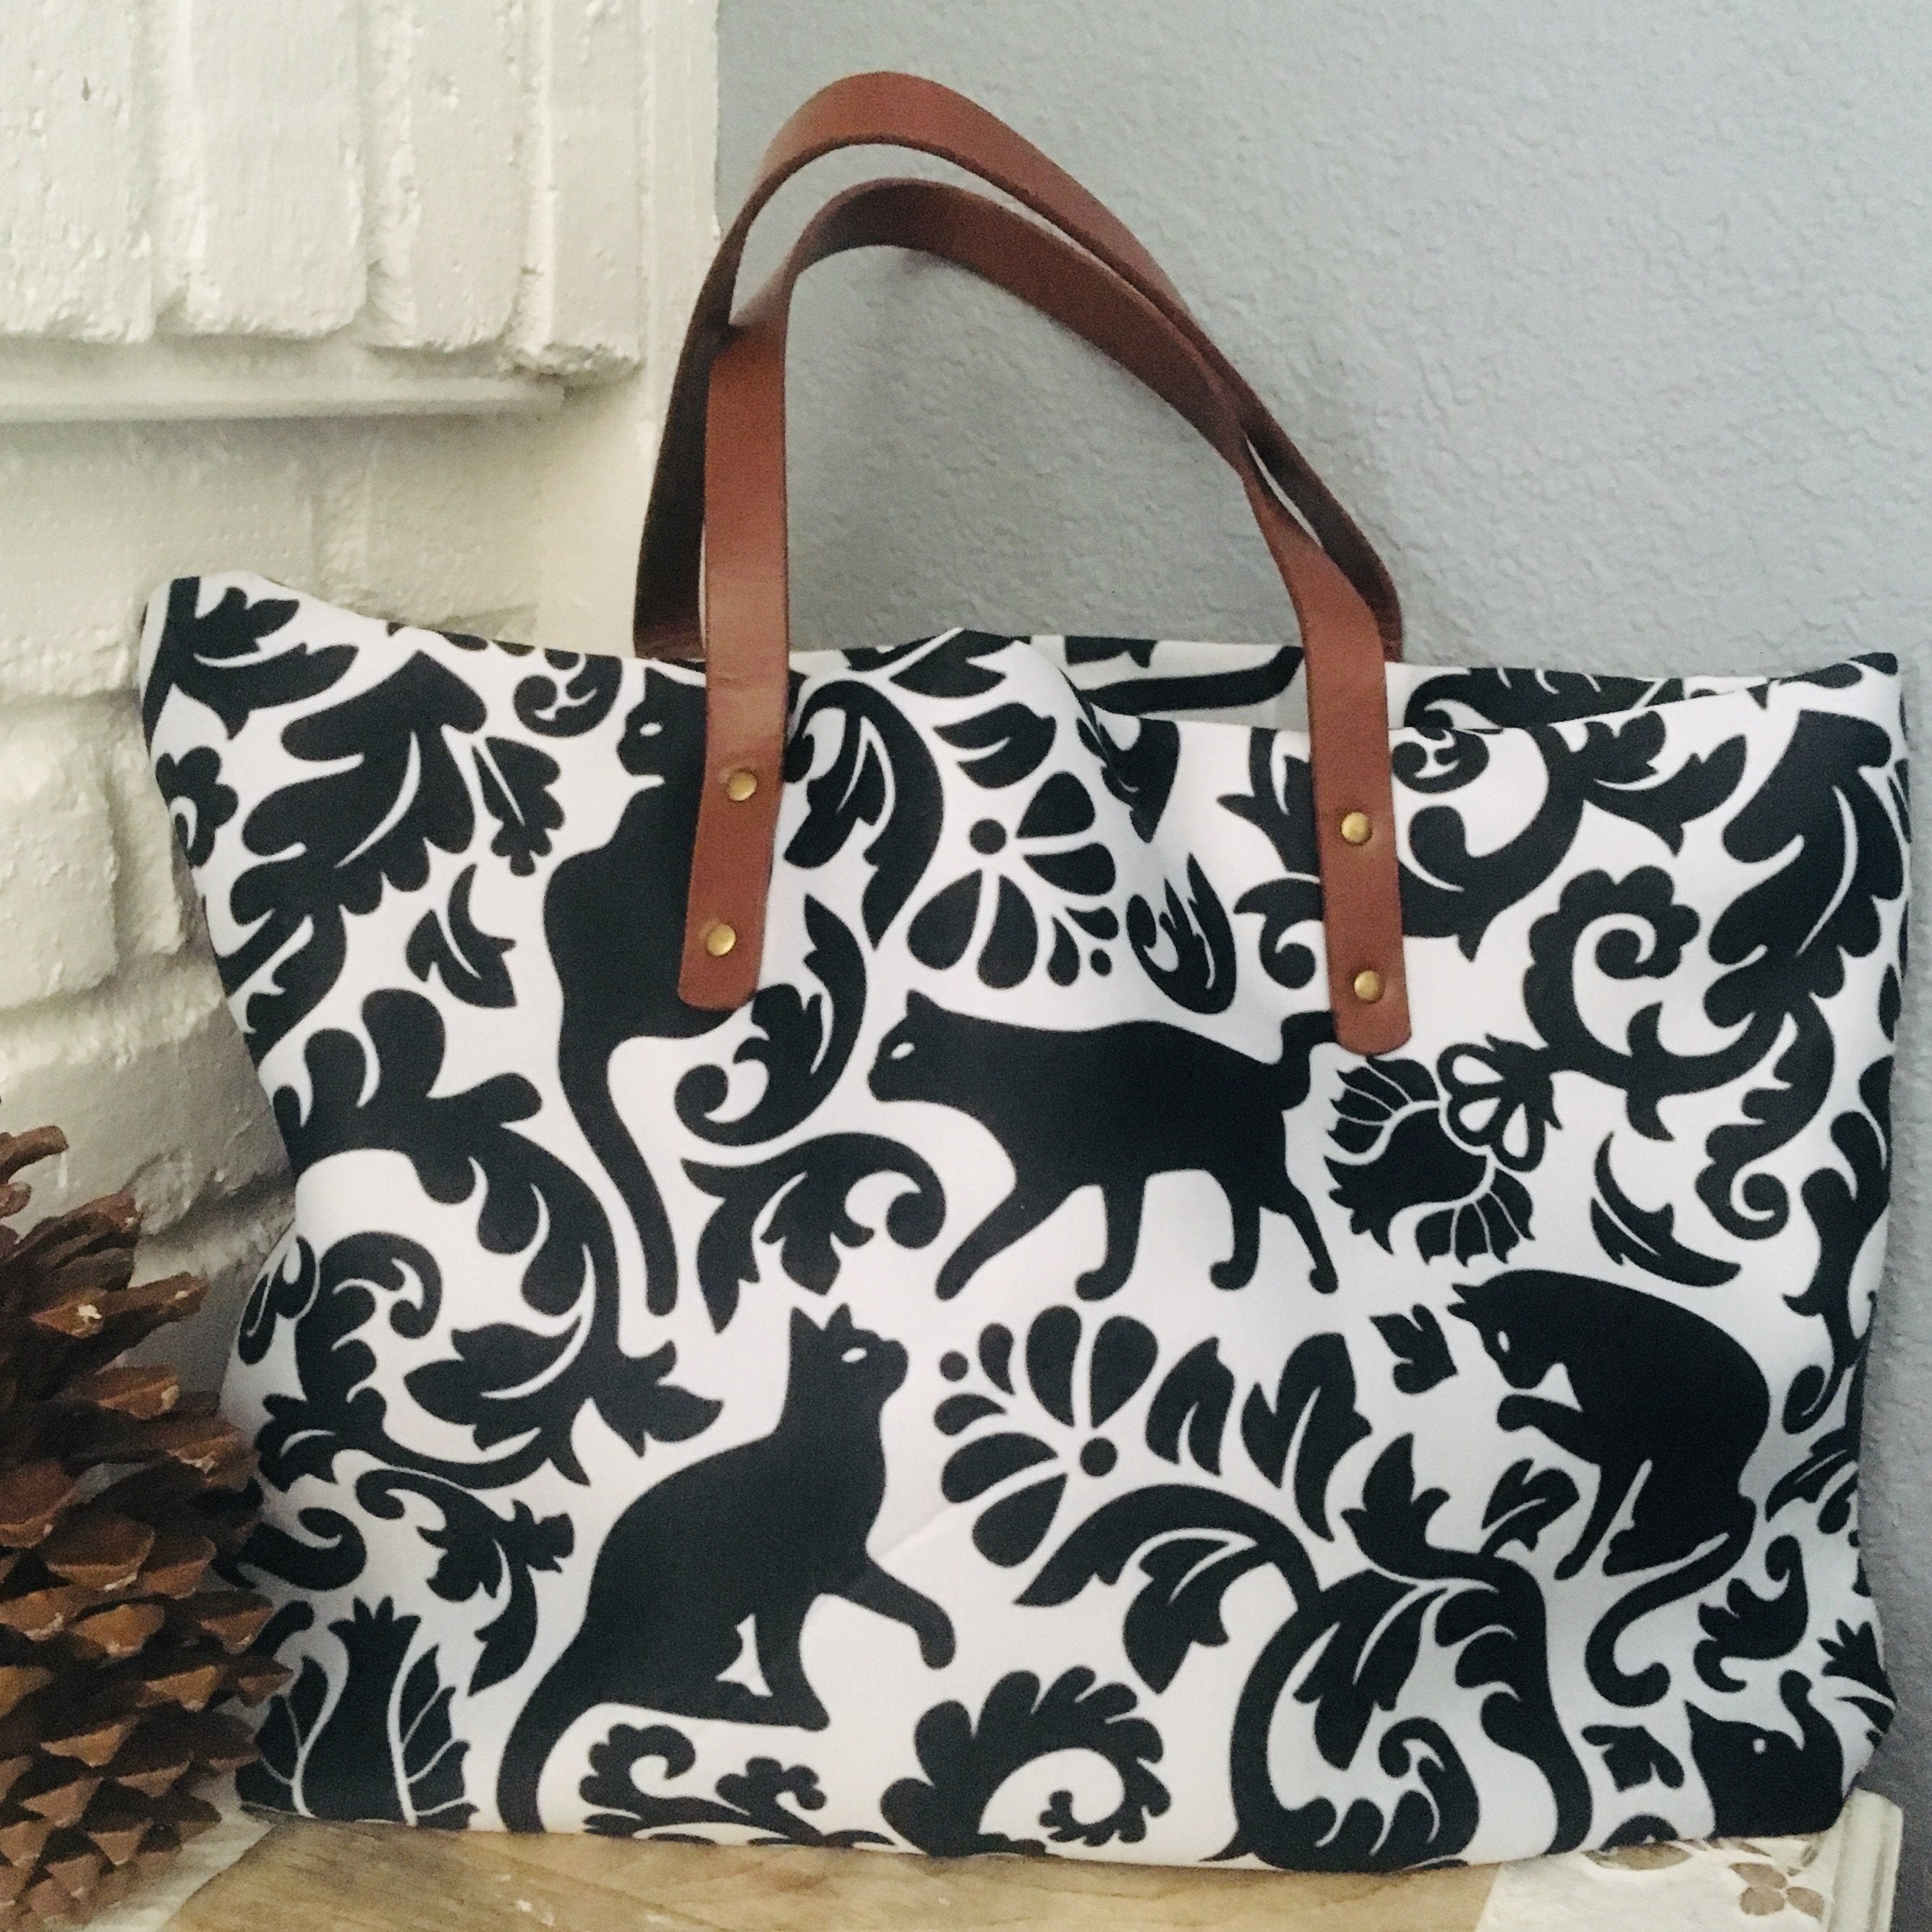 Cat Gifts for Women, Cat Purse Featuring Black Cats On a White Backdrop